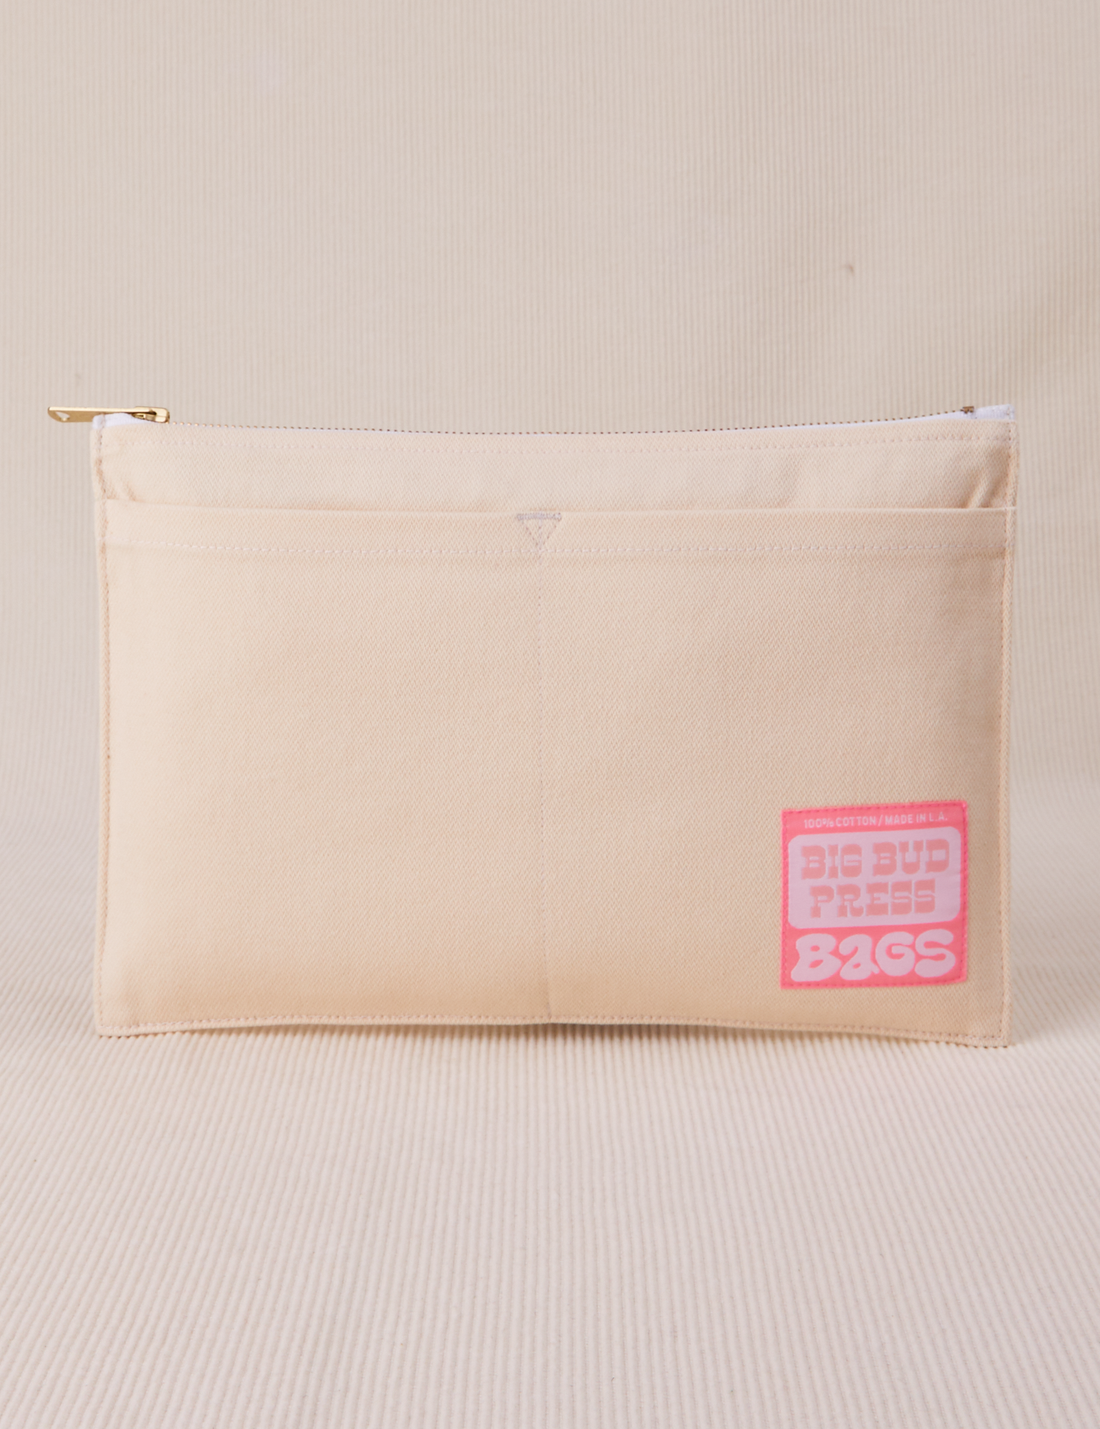 Big Pouch in Vintage Off-White